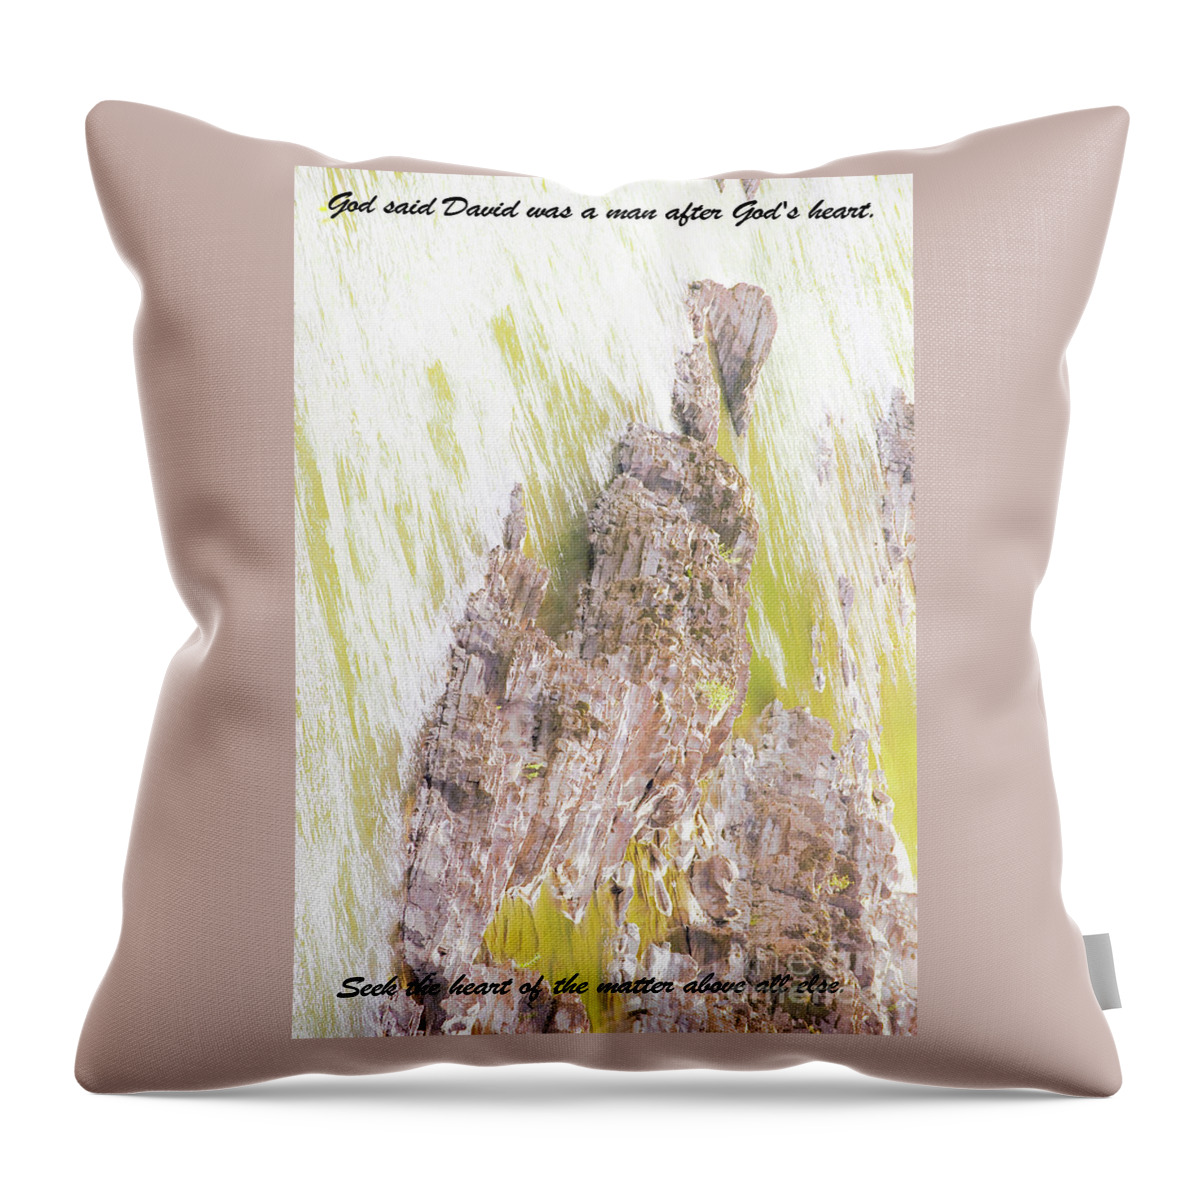 Christian Throw Pillow featuring the photograph The Heart by Merle Grenz